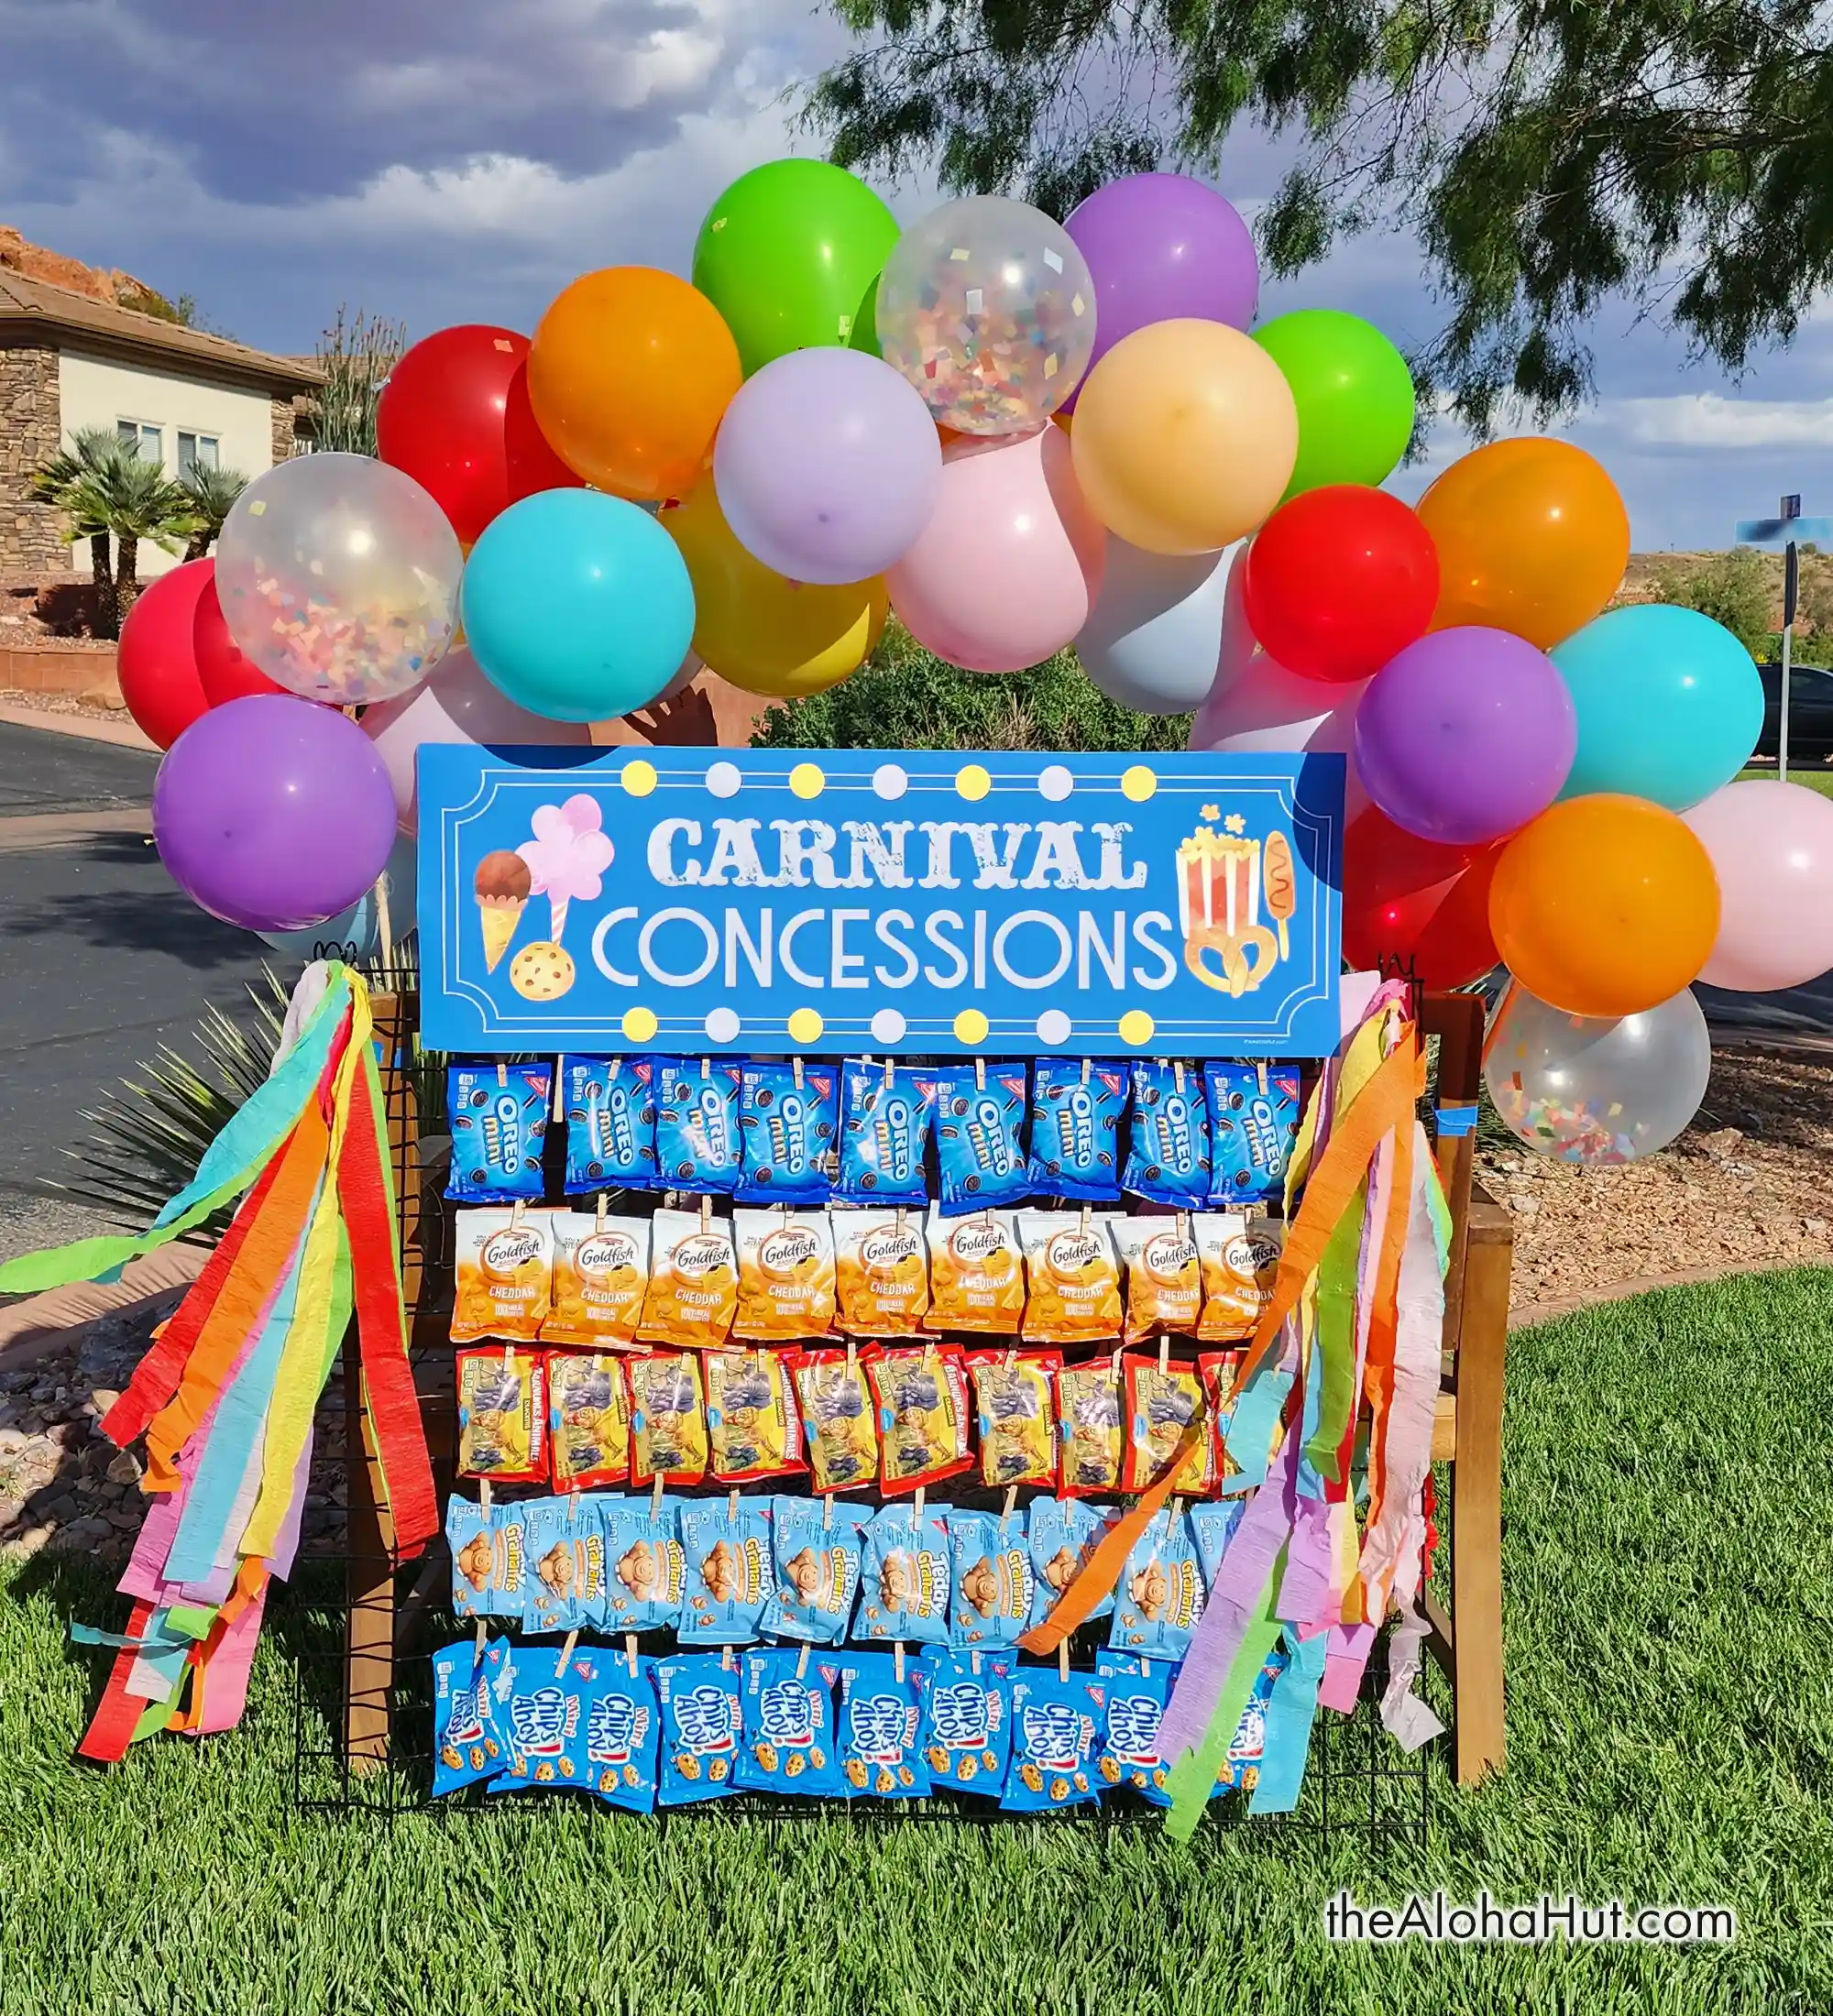 Easy and cheap carnival pary games and circus party themed games and ideas. DIY games for a school carnival, church carnival or fall festival, birthday party celebrations and more. Printables for carnival prizes, concessions, decor, and more.